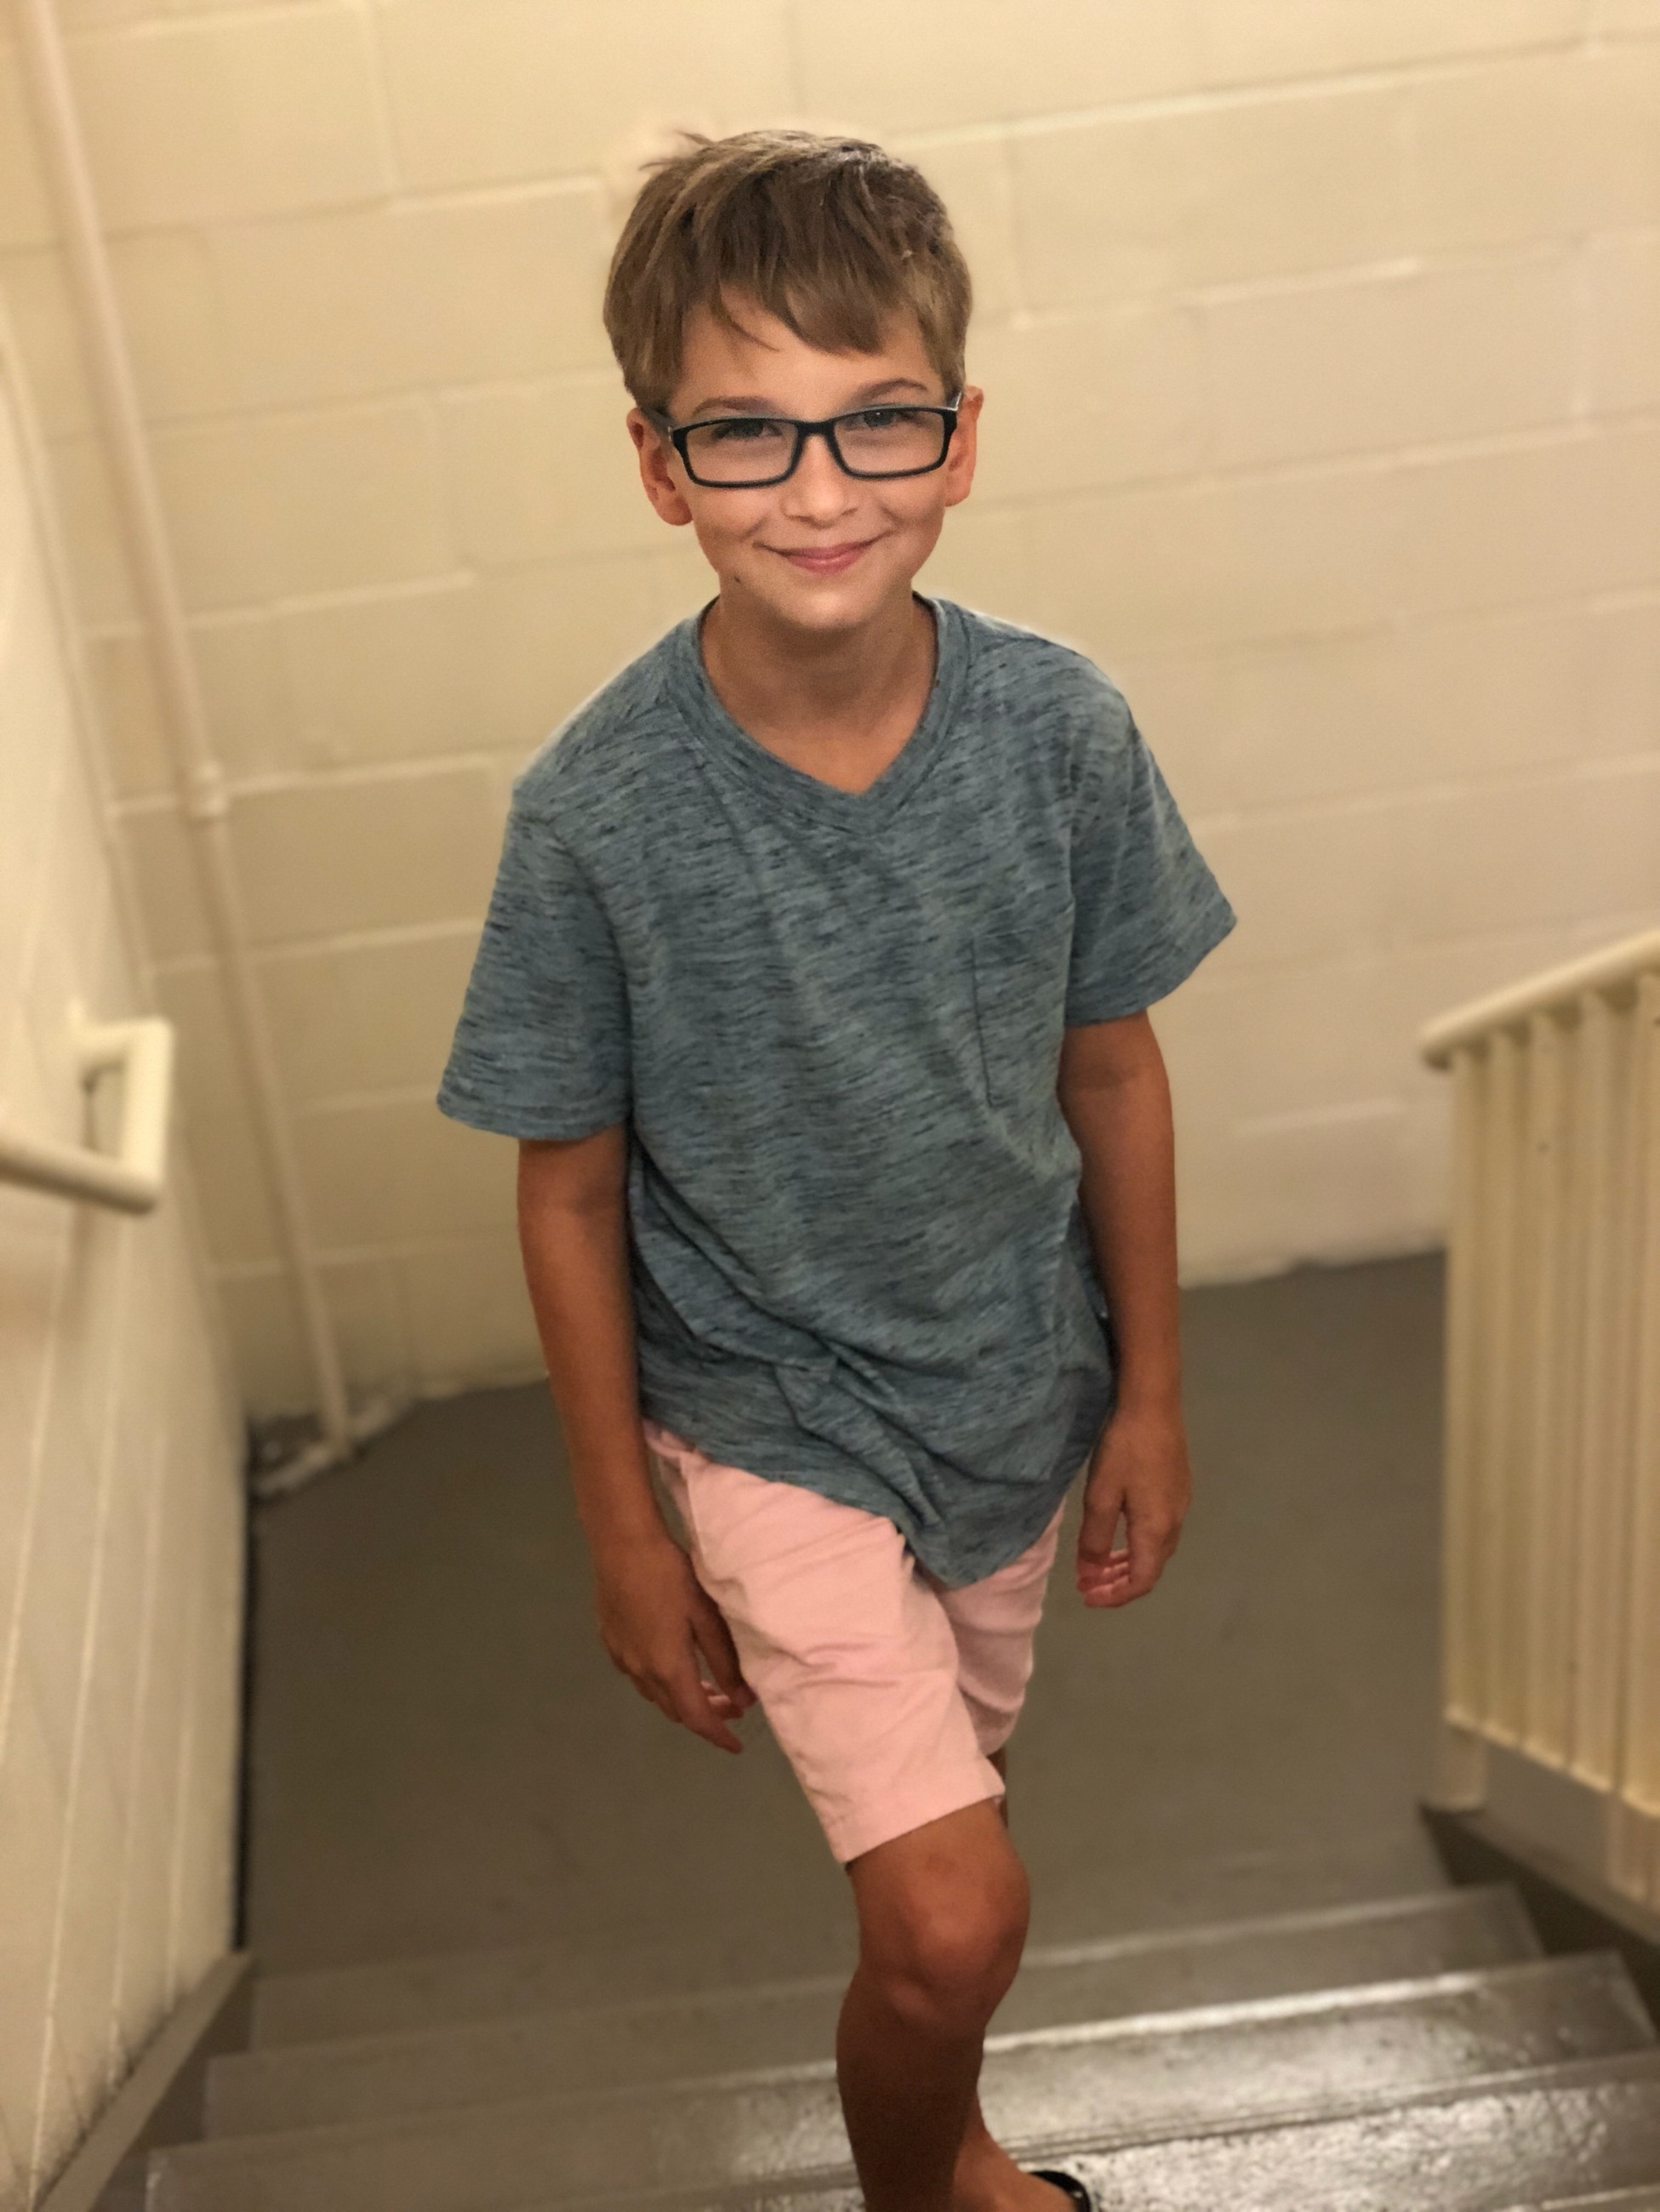 pediatric patient wearing glasses smiling standing on stairs